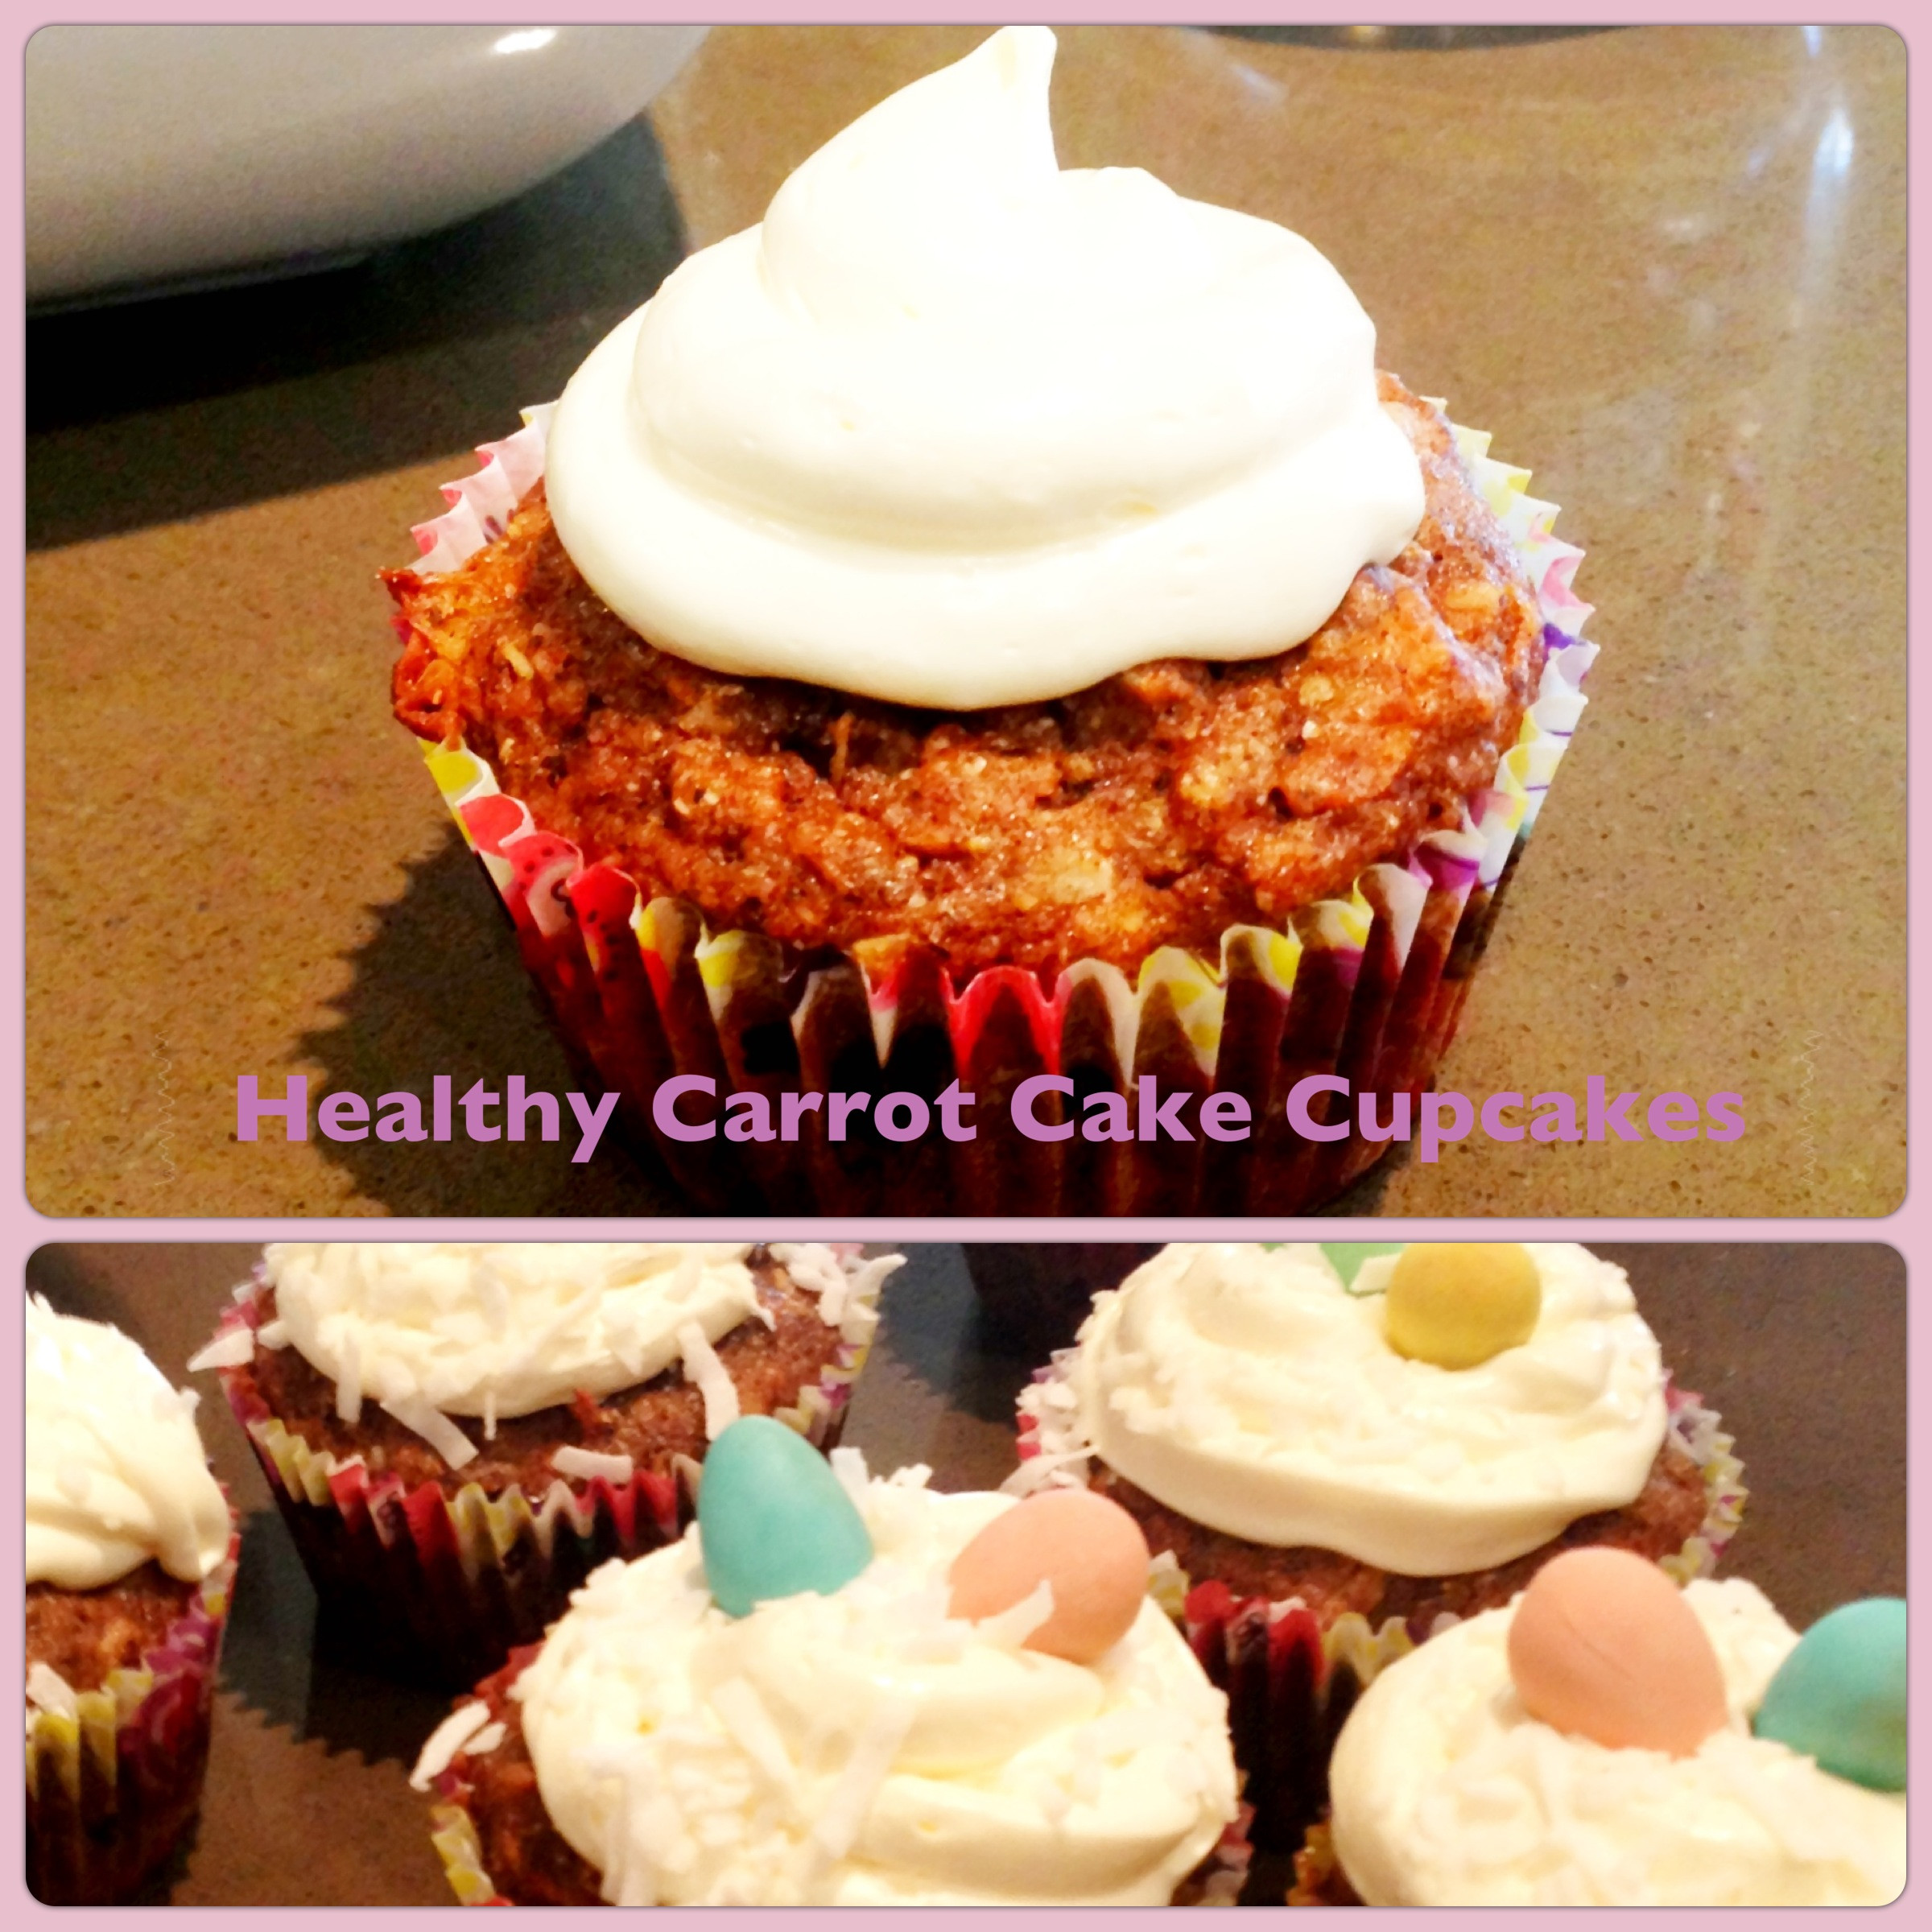 Healthy Carrot Cake Cupcakes
 Healthy Carrot Cake Cupcakes